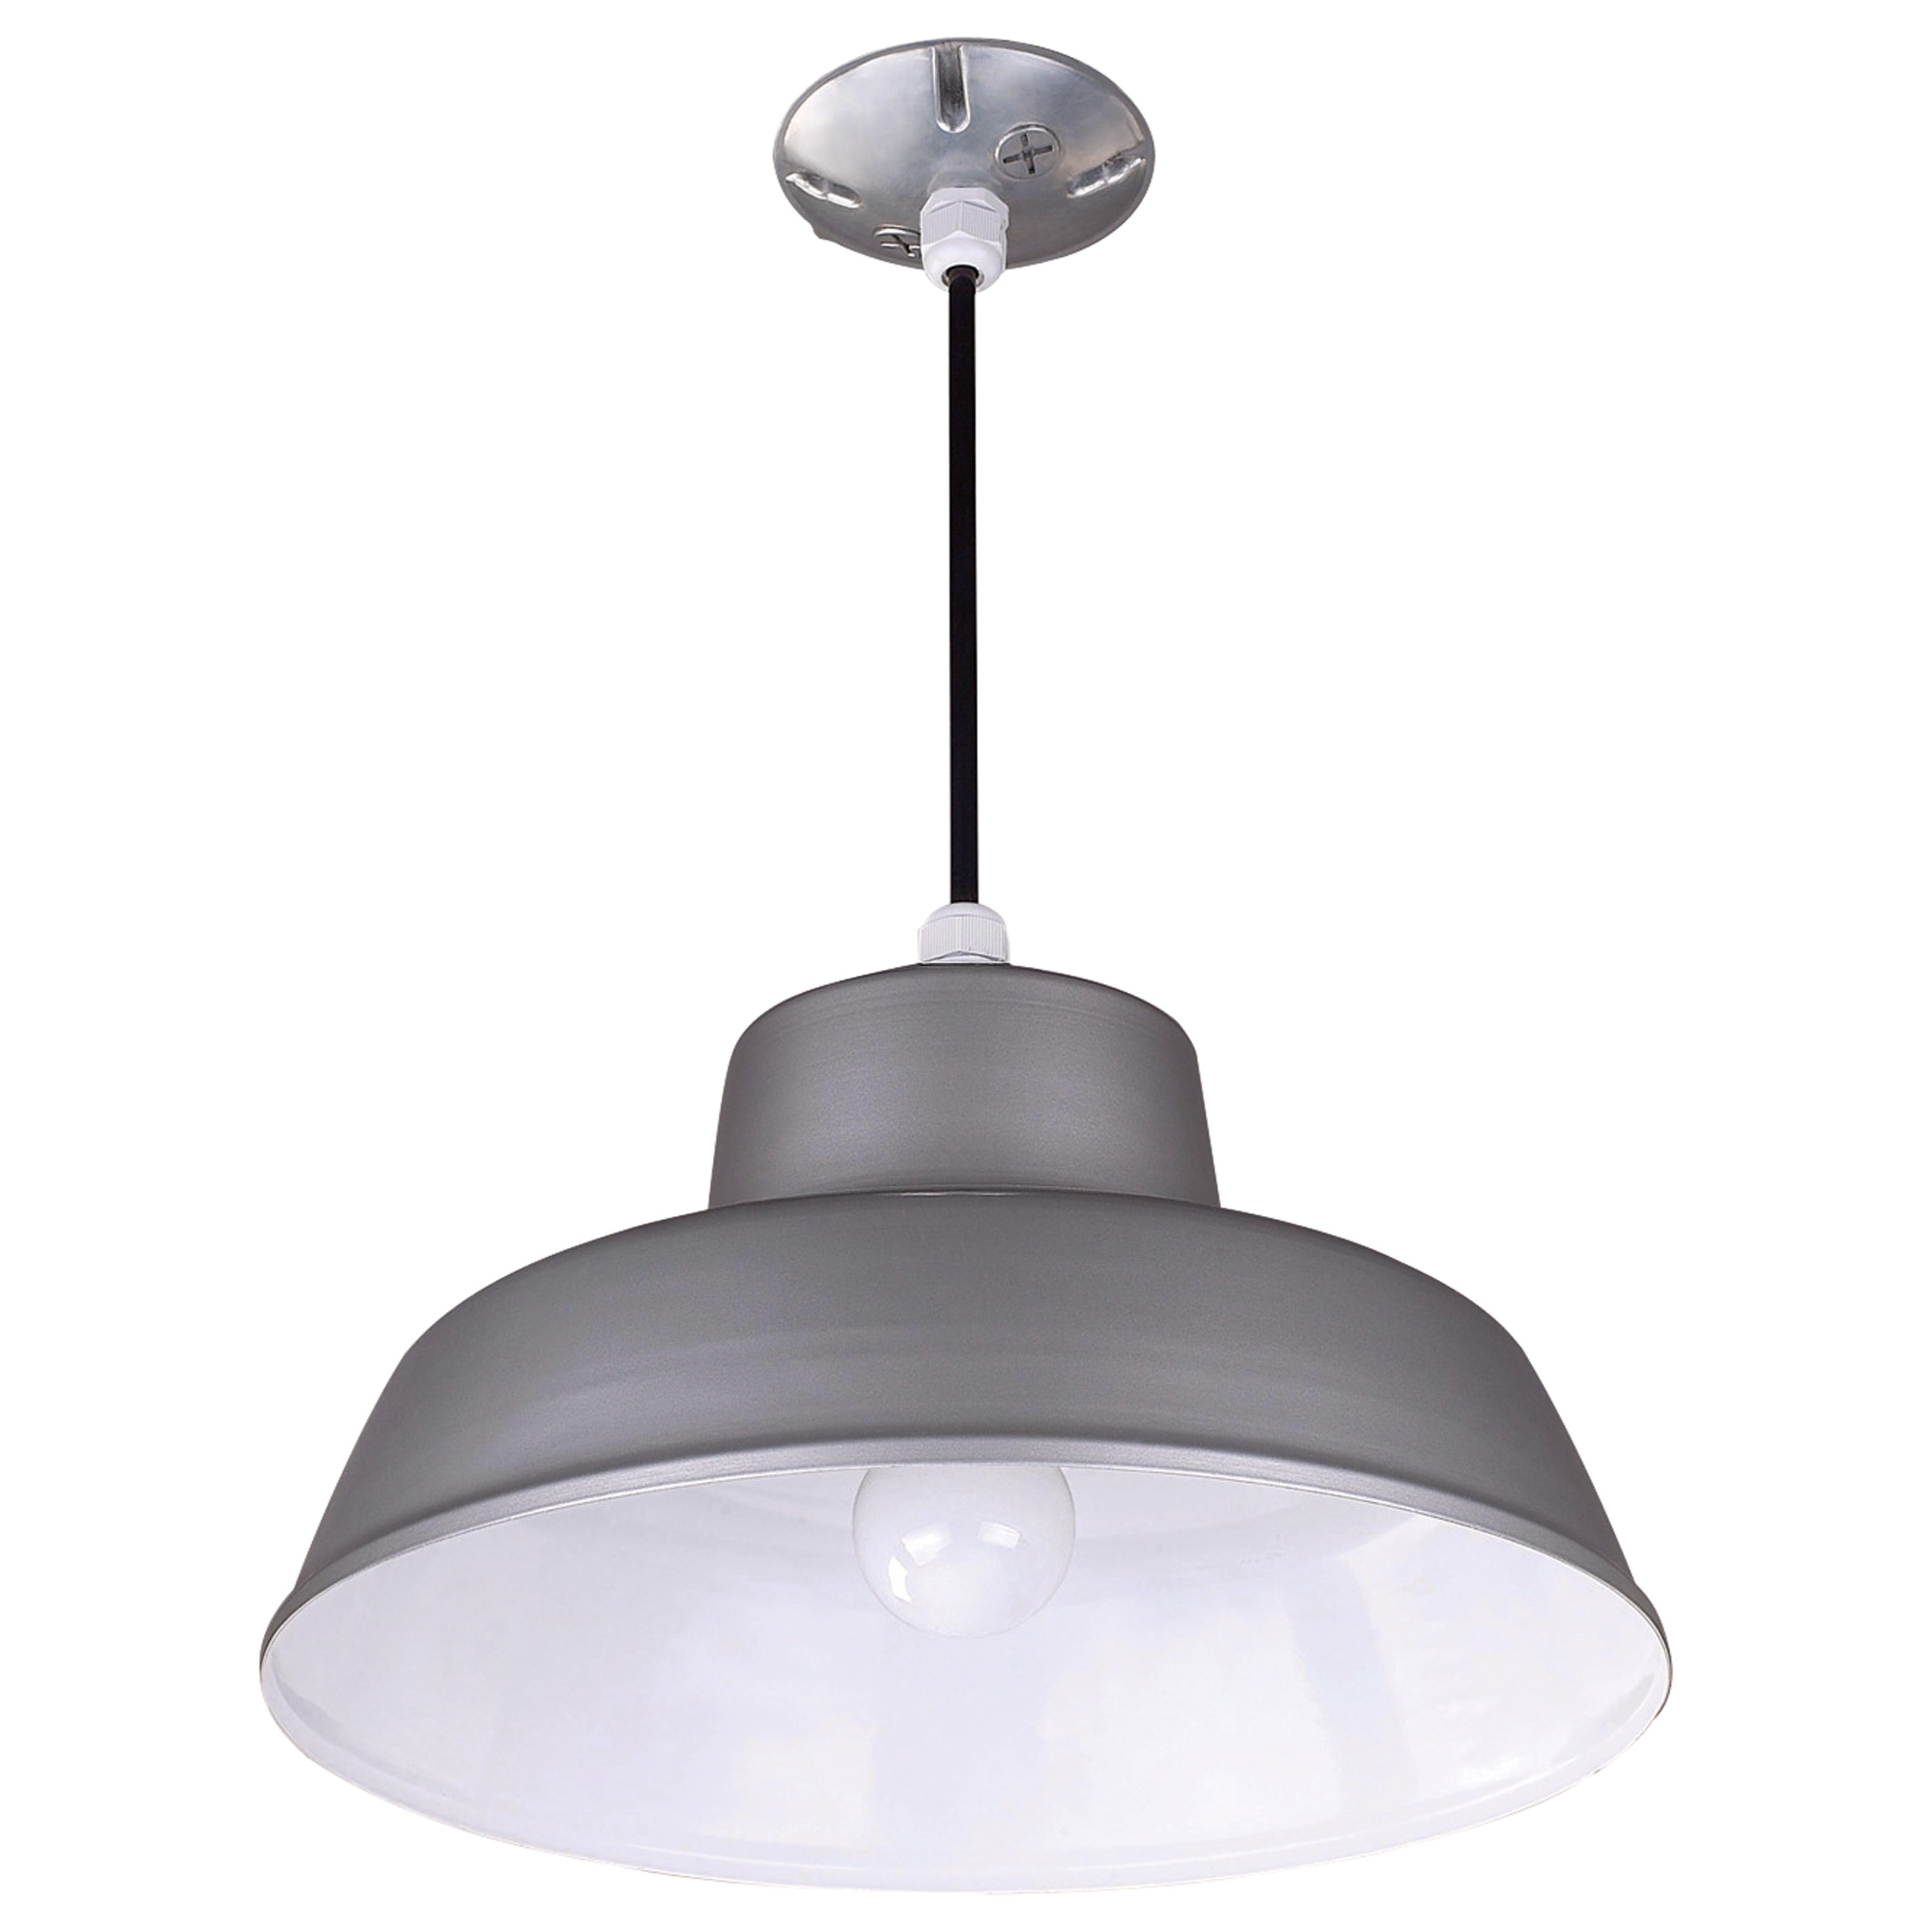 Permalink to Hanging Light Fixture Suspended Ceiling